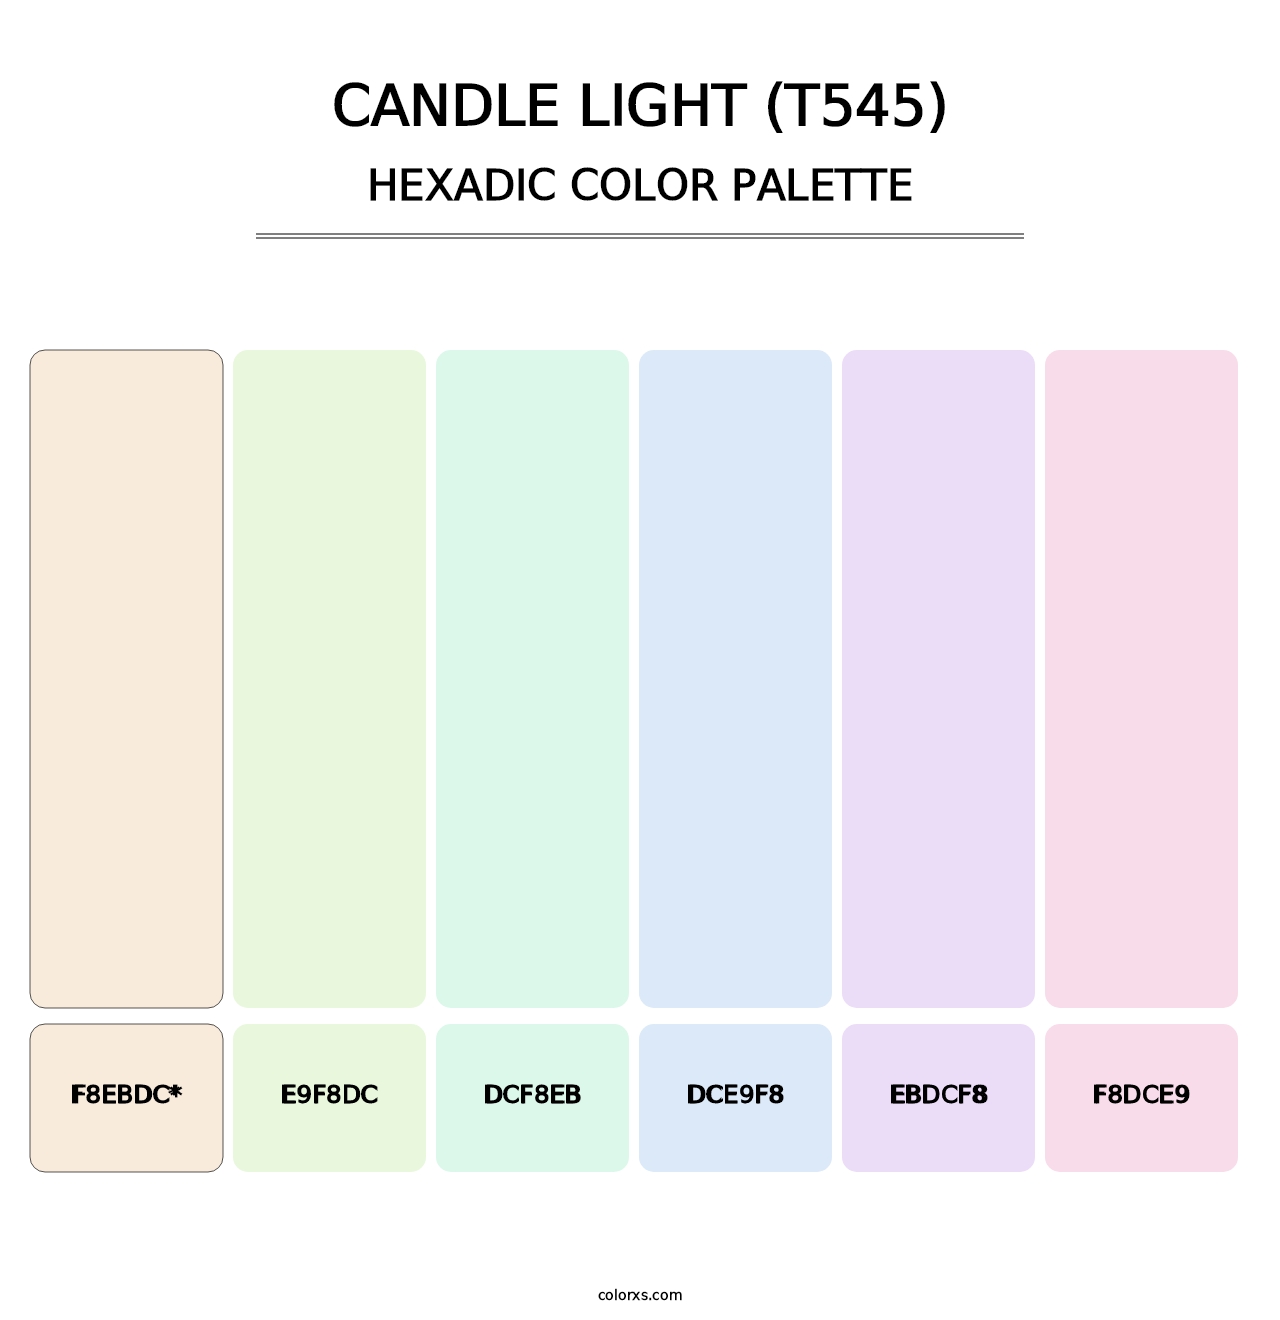 Candle Light (T545) - Hexadic Color Palette